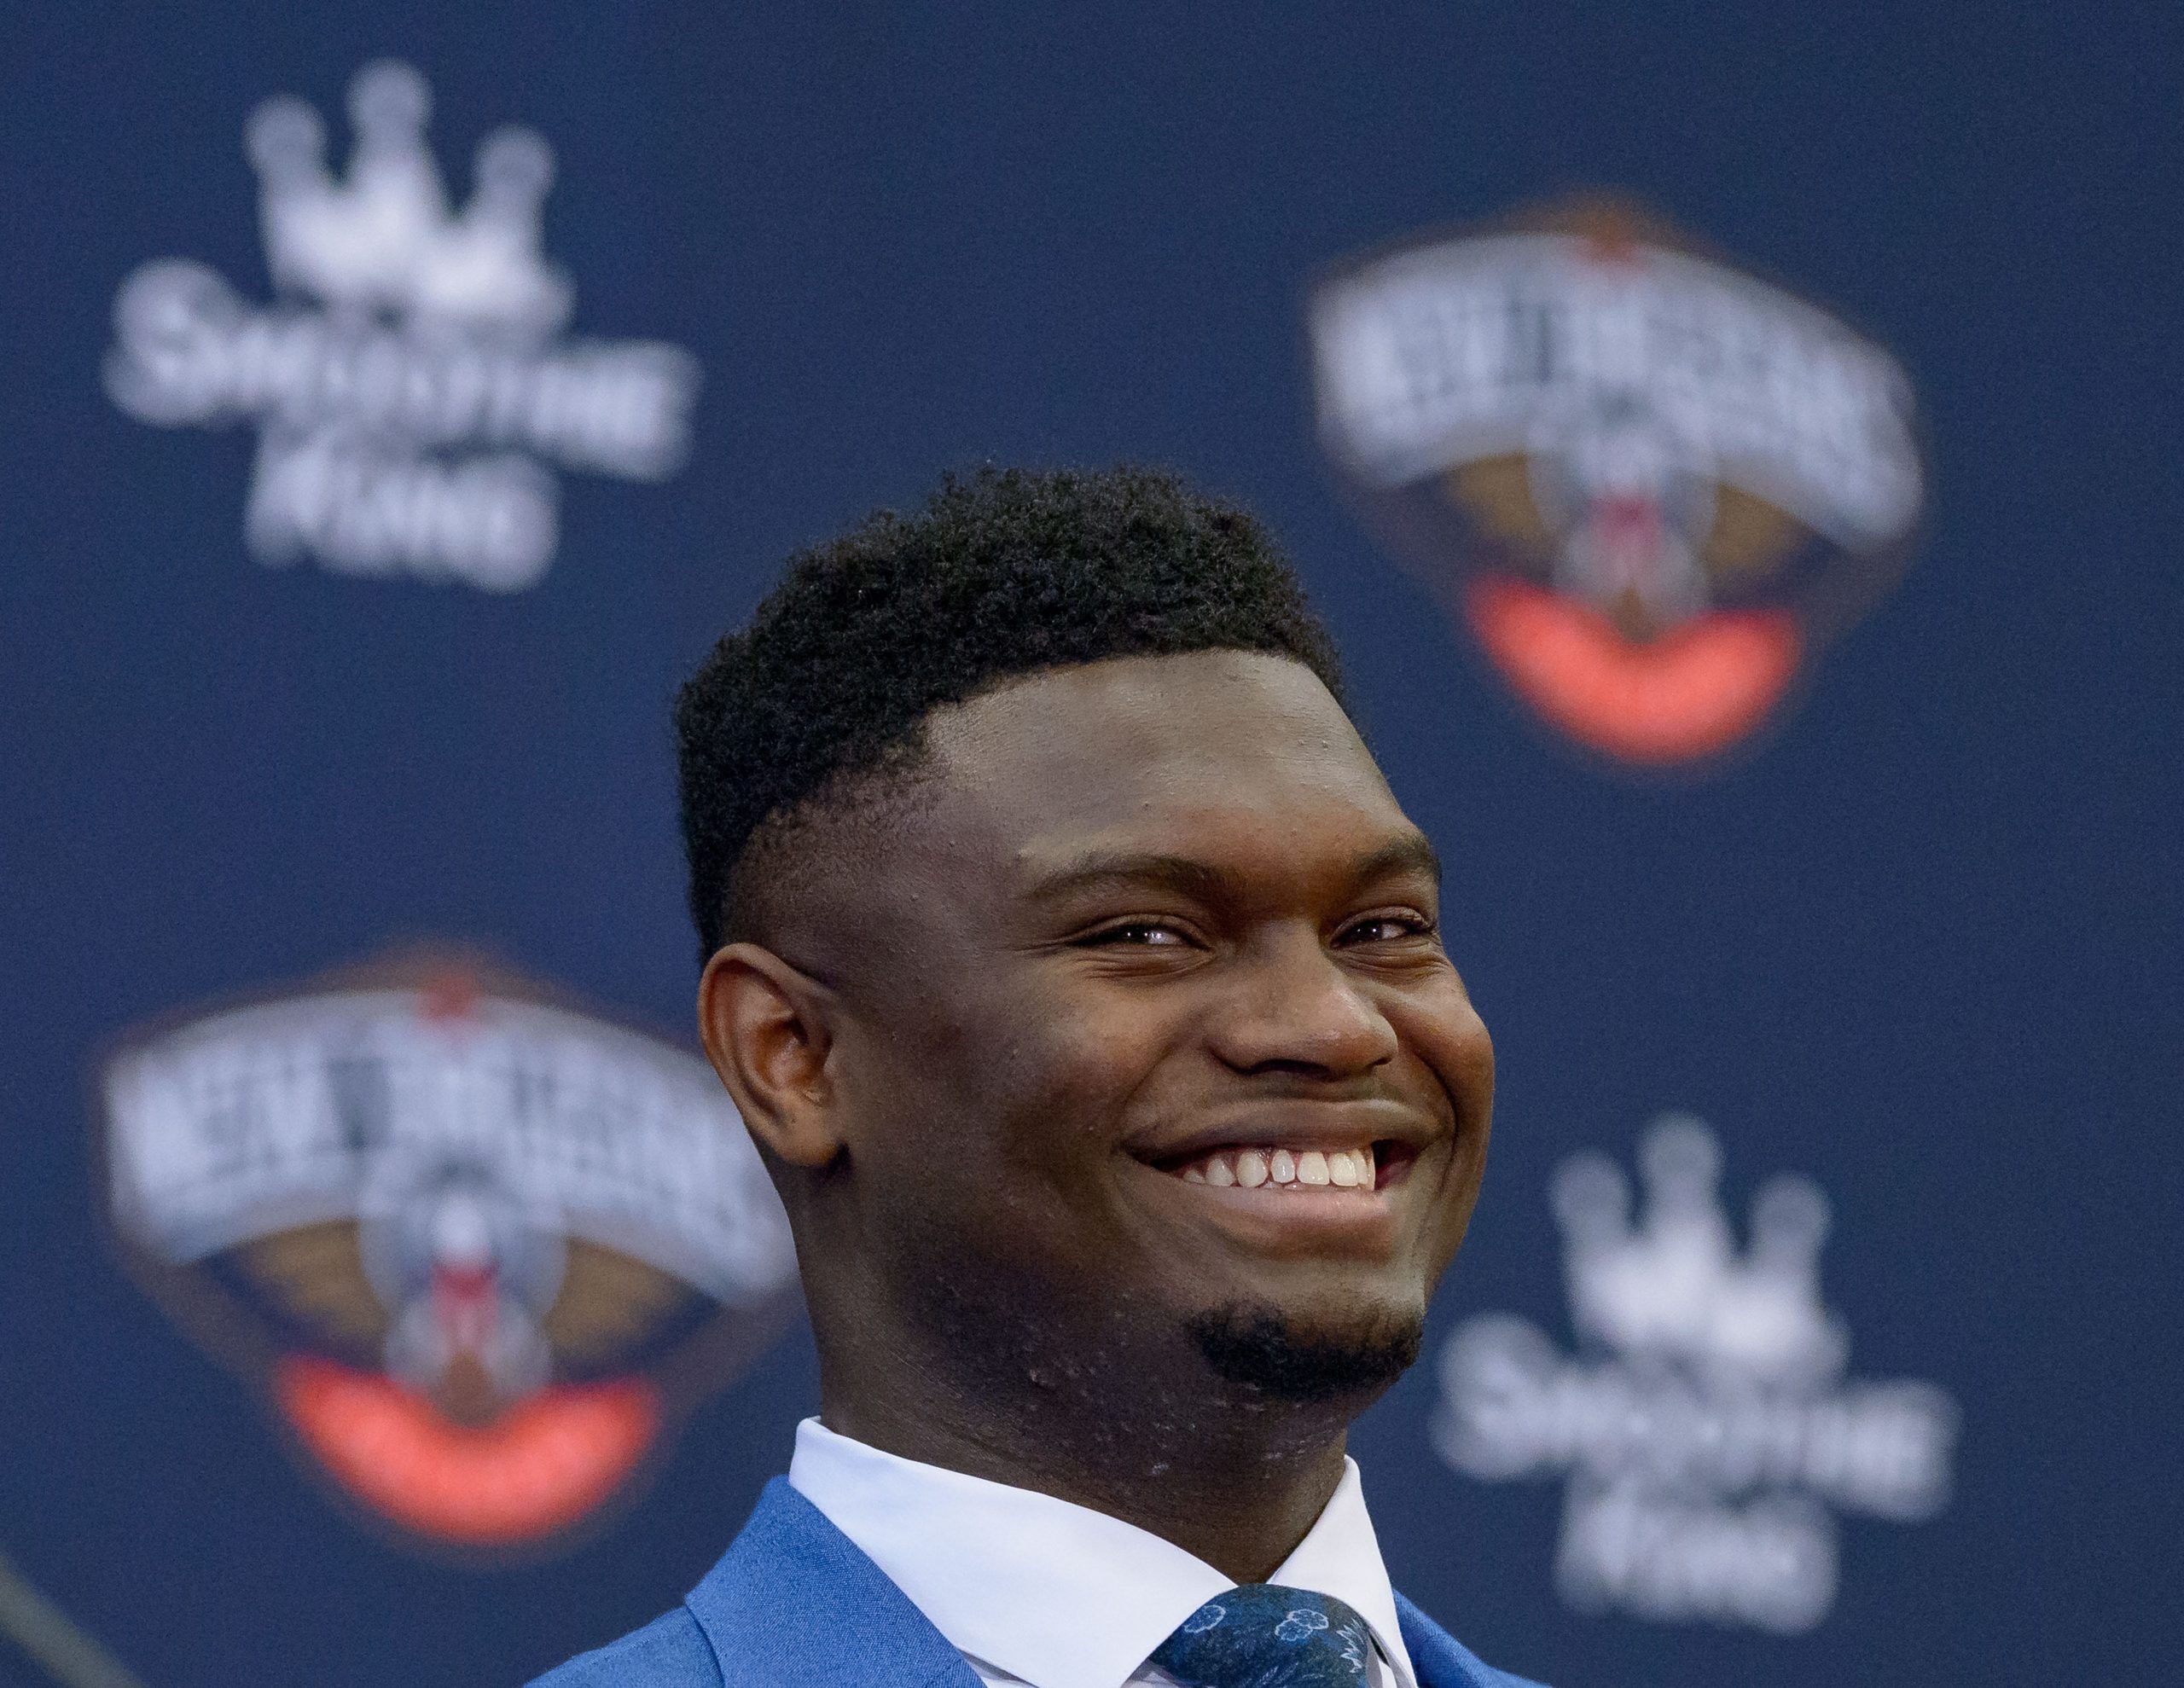 Power Forward Zion Williamson is introduced by Saints and Pelicans owner Gayle Benson, general manager David Griffin, and head coach Alvin Gentry at the New Orleans Pelicans training facility in Metairie, Louisiana Friday June 21, 2019 the first day of summer after being selected the first overall pick of the NBA Draft yesterday. Williamson who played for Duke is considered one of the most promising draft picks in years and will now carry the hopes of the franchise after the departure of Anthony Davis to the Lakers. Photo by Matthew Hinton